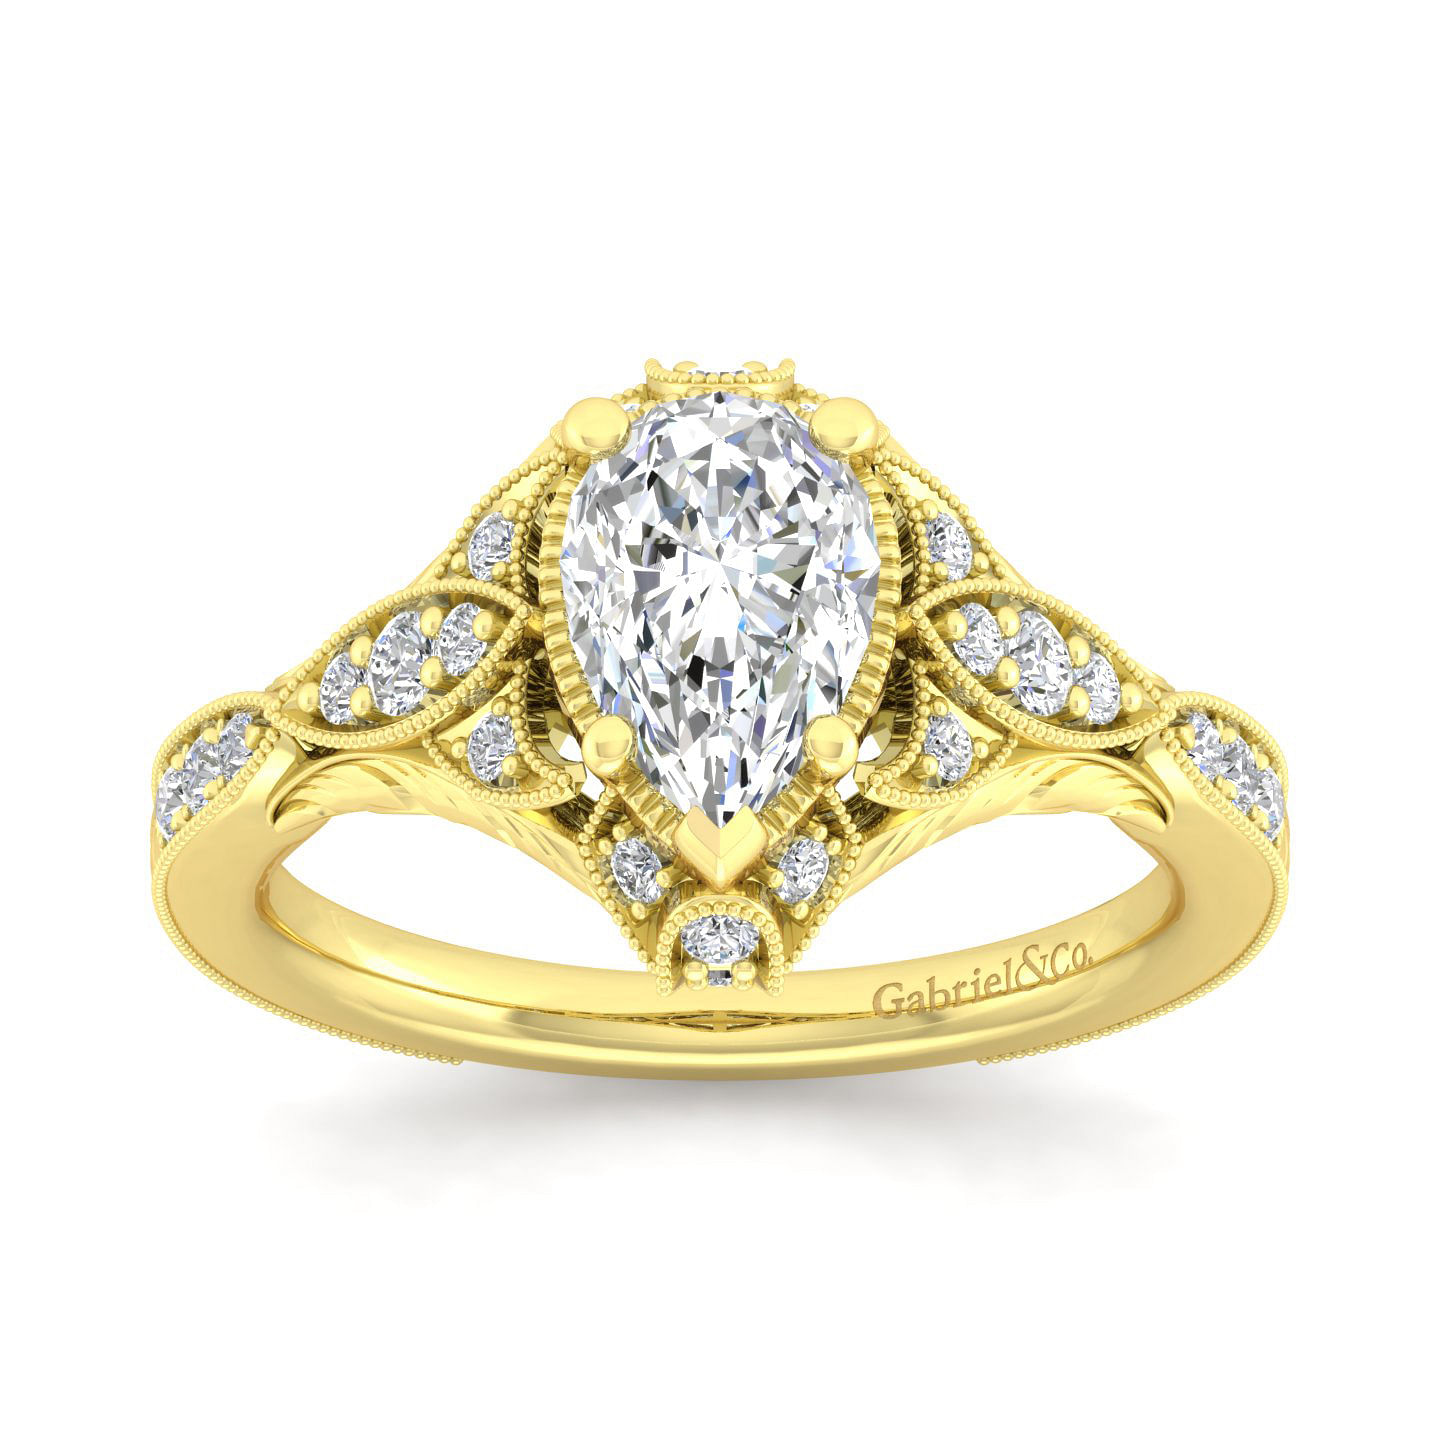 Unique 14K Yellow Gold Vintage Inspired Pear Shape Diamond Halo Engagement Ring